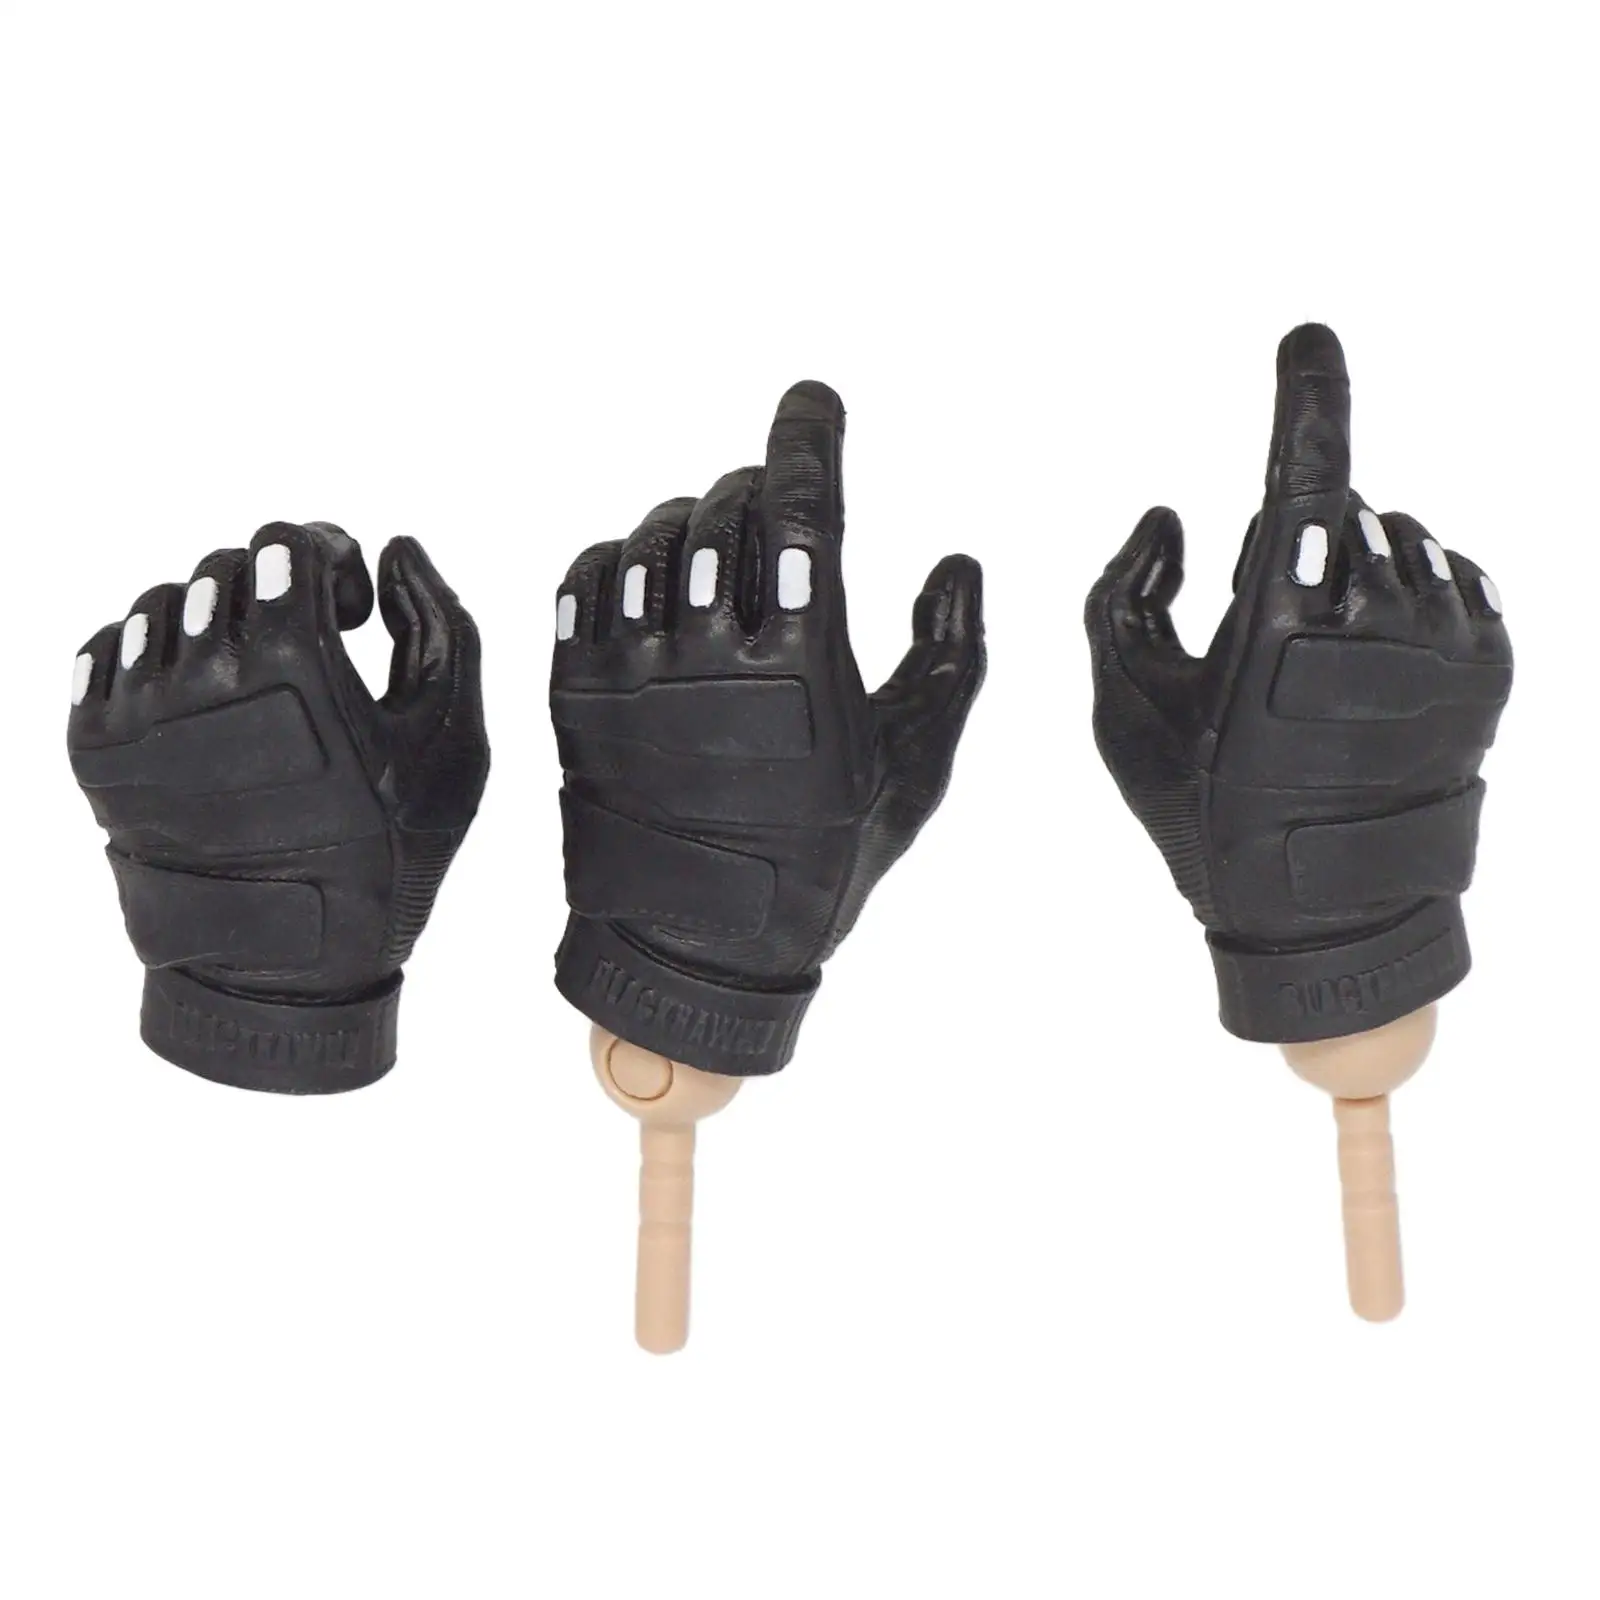 3x 1:6 Male Gloves Hands Doll Decor for 12inch Collectible Action Figures